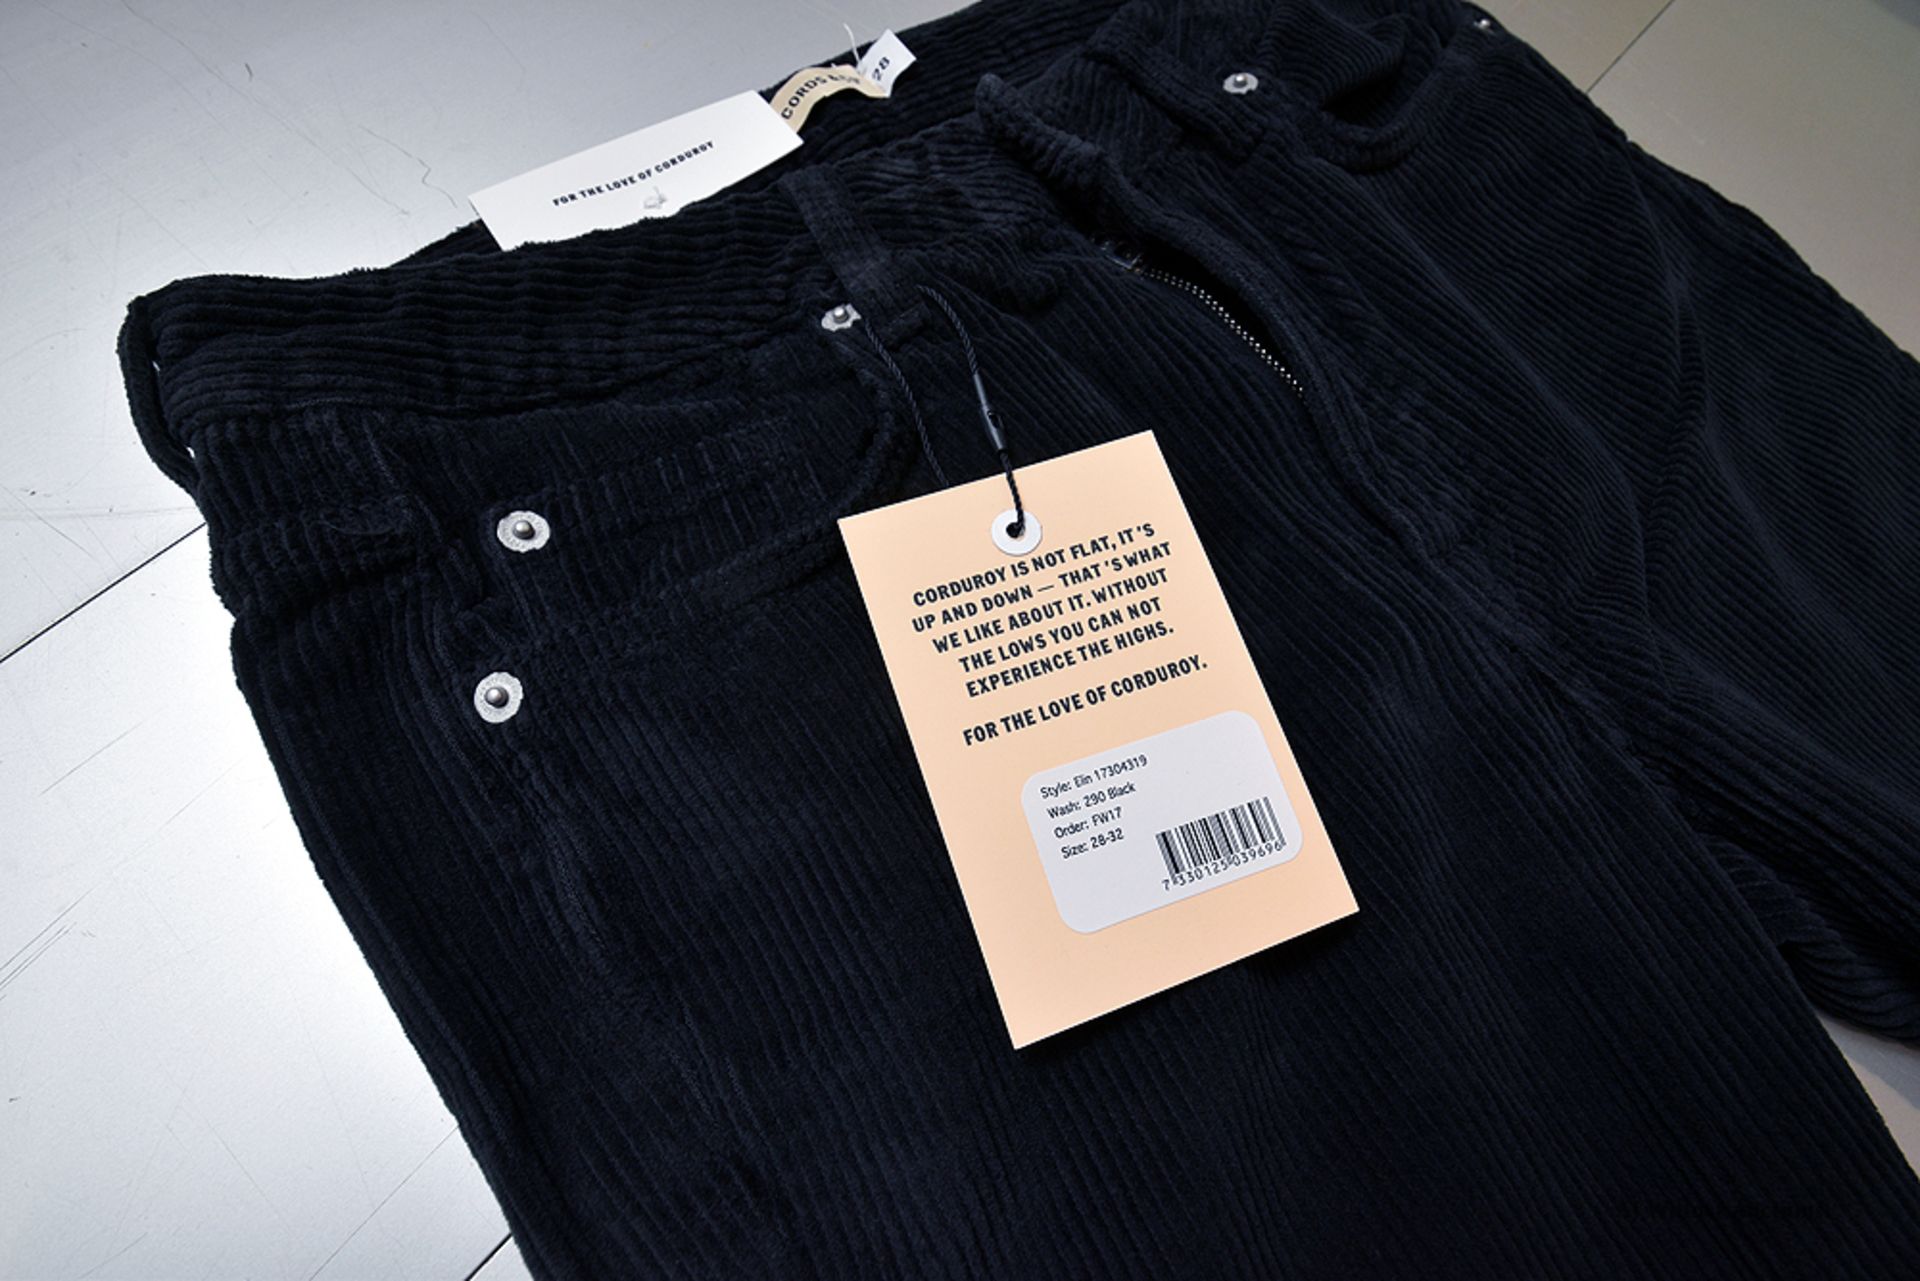 The Cords & Co. "Elin" Style, Women's/ 5-Pocket/ Mid-Waist/ Straight Fit/ Cropped Leg Pants - Image 6 of 6